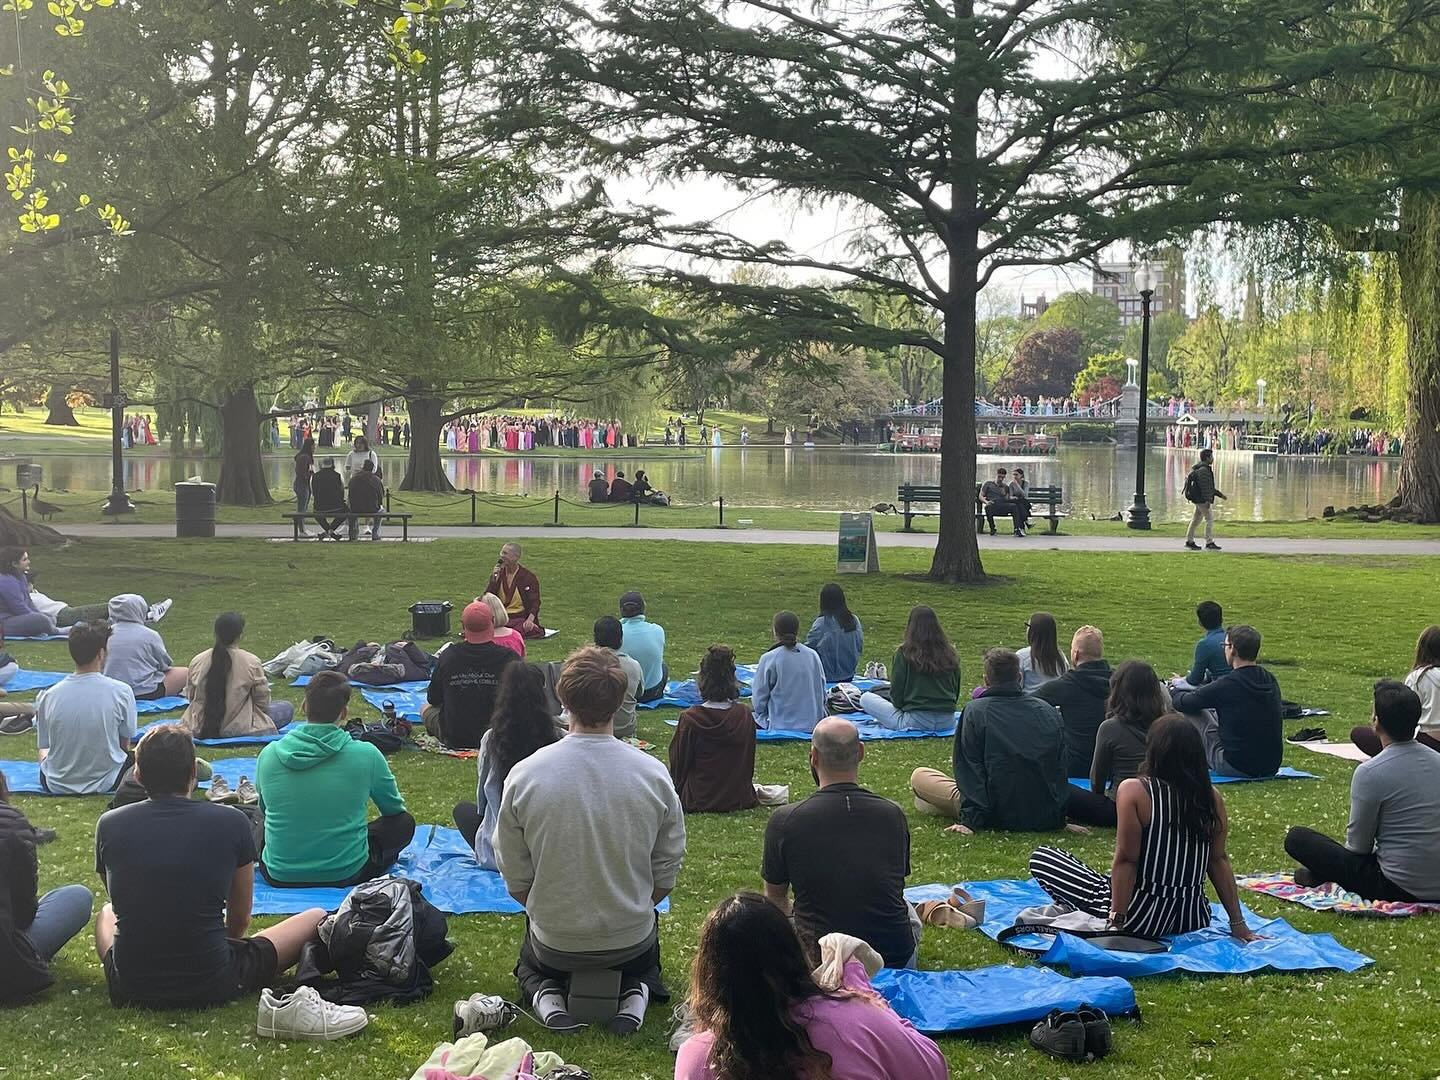 Over 50 people gathered at the Boston Public Garden on Friday for some free outdoor meditation and a chance to connect with other meditators. Huge thank you to all the volunteers who helped set up and to everyone who came. 

Next event: Friday, June 